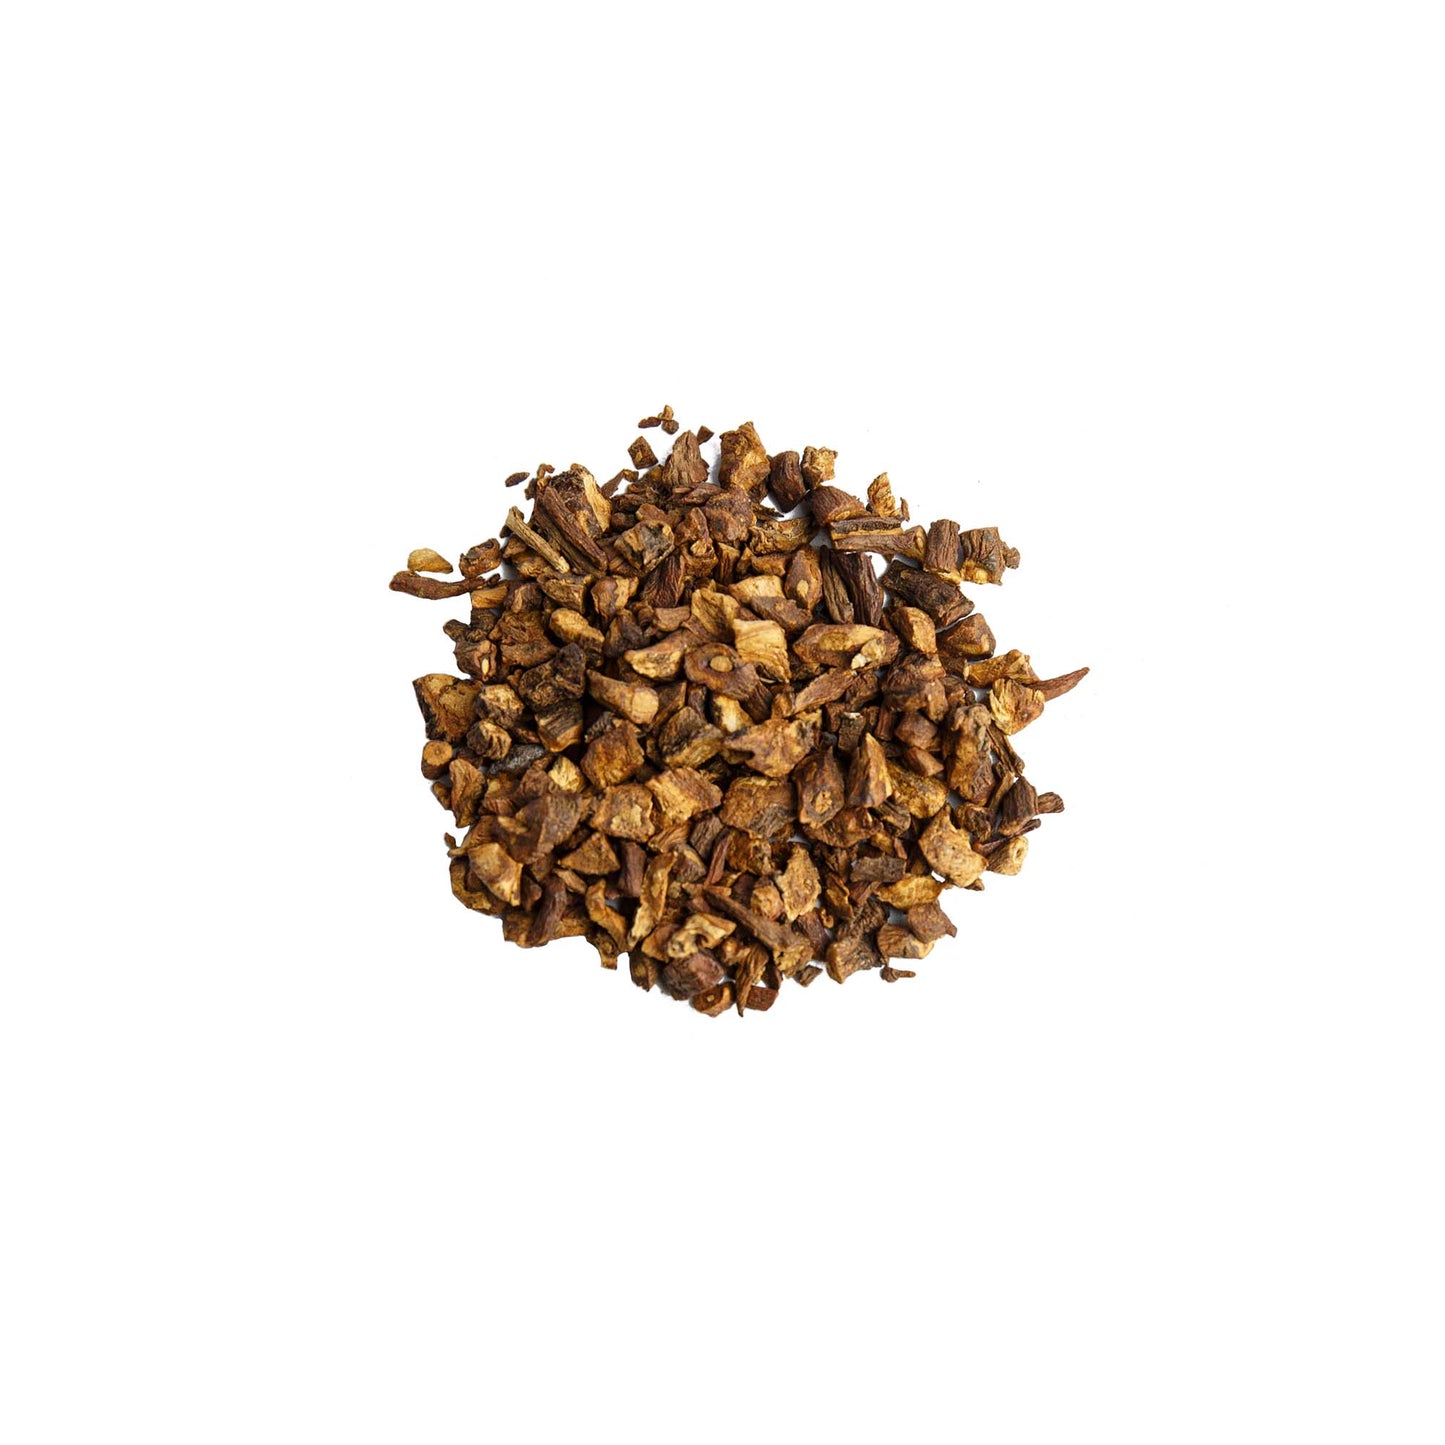 Primary Image of Dandelion Root - Roasted